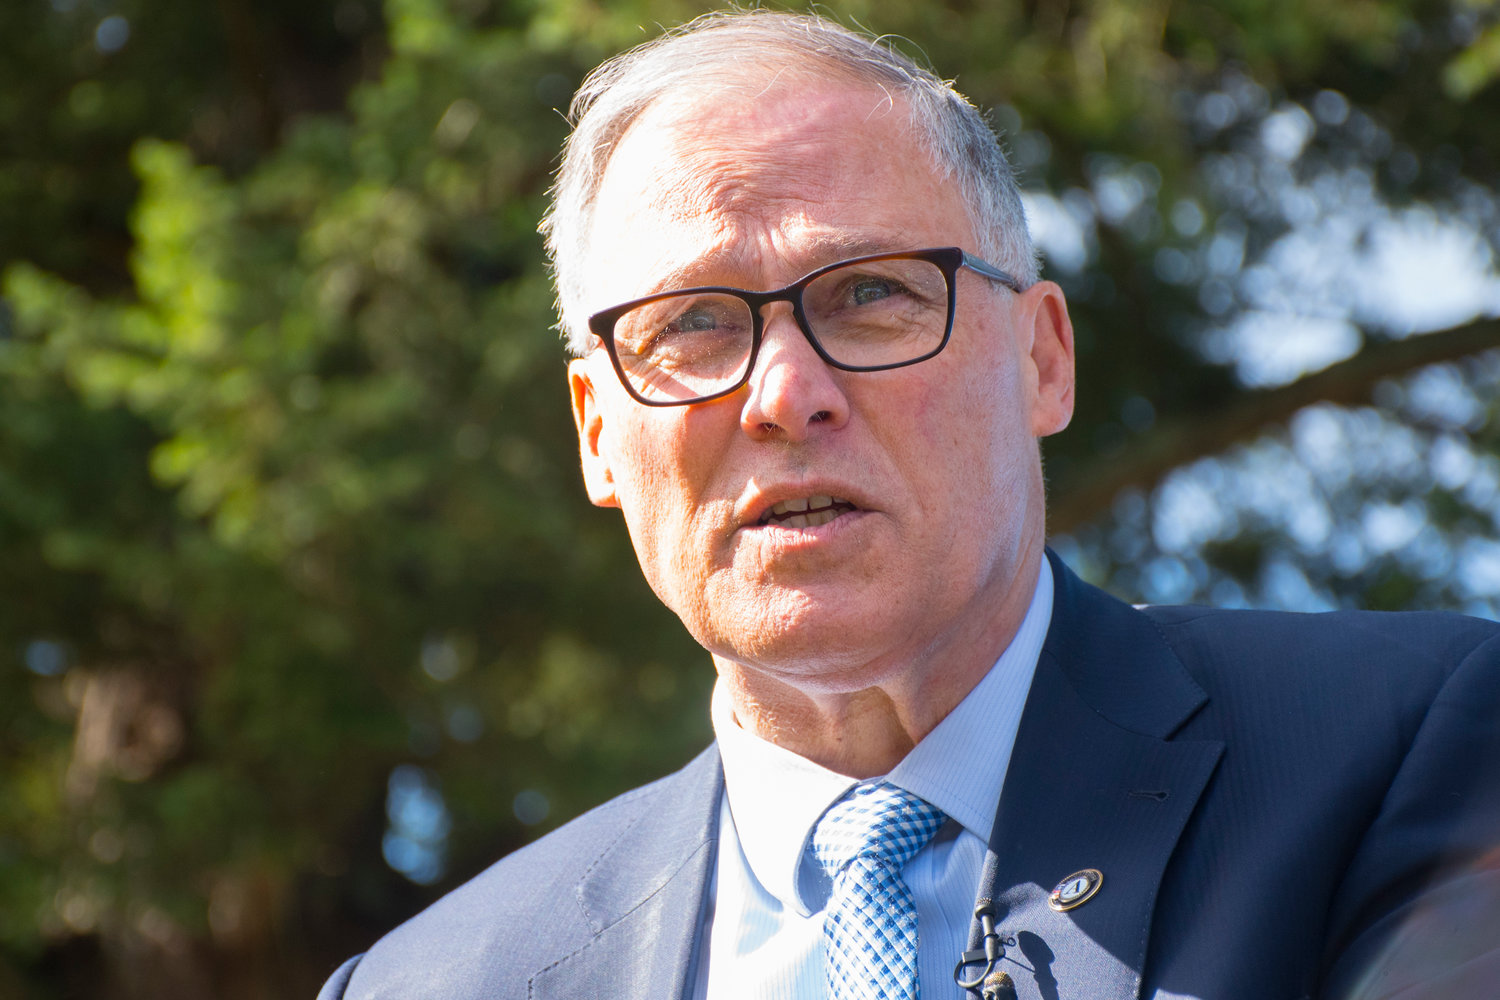 Gov. Jay Inslee takes a tour of a potential COVID-19 quarantine and isolation site at Maple Lane in March 2020.